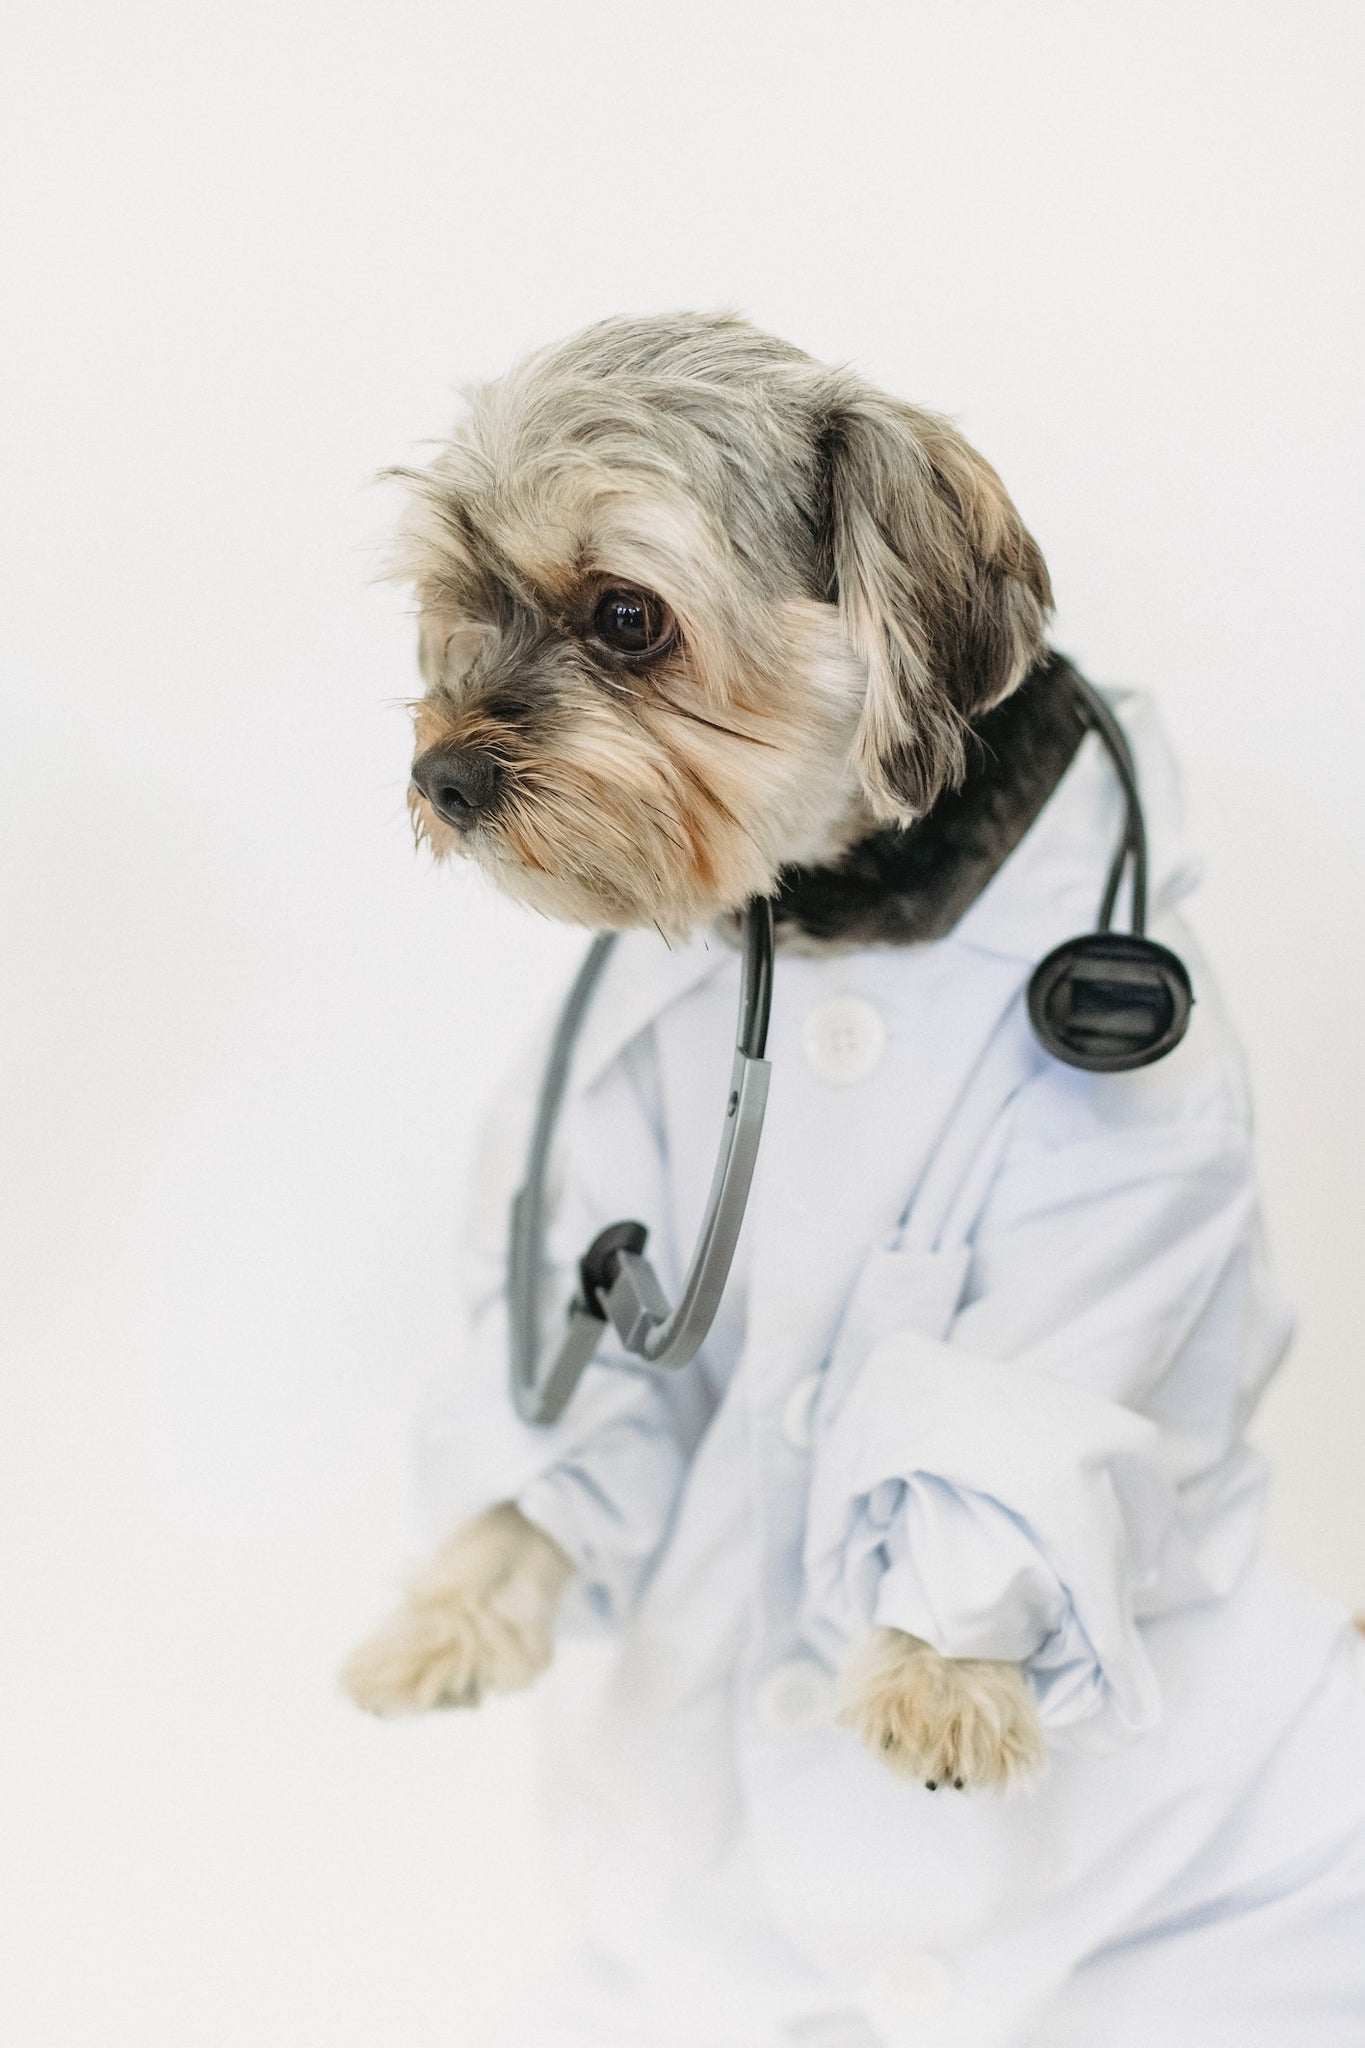 Common (nutritional) Diseases in Dogs